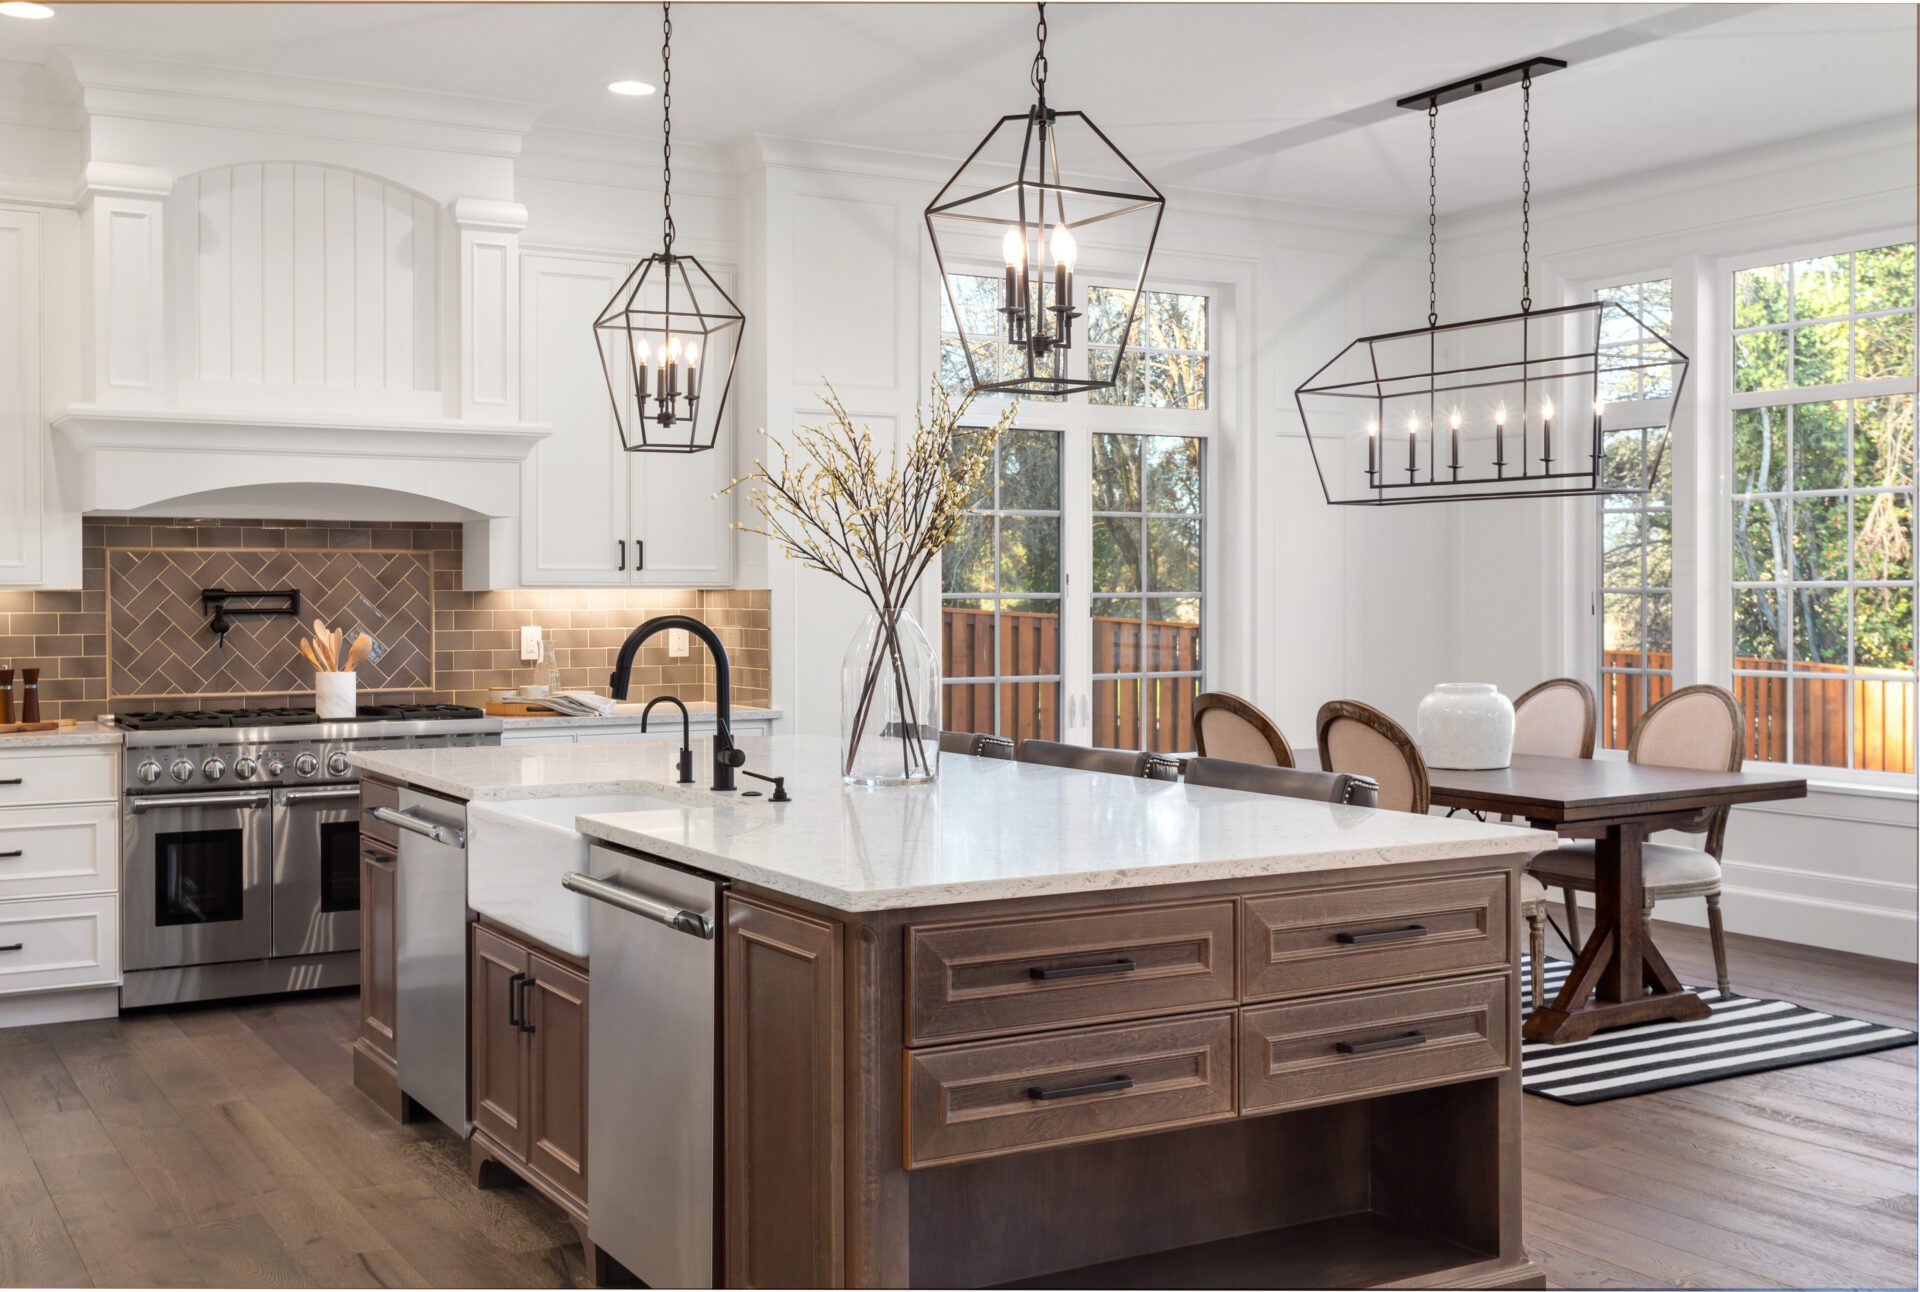 Beautiful kitchen in new traditional style luxury home